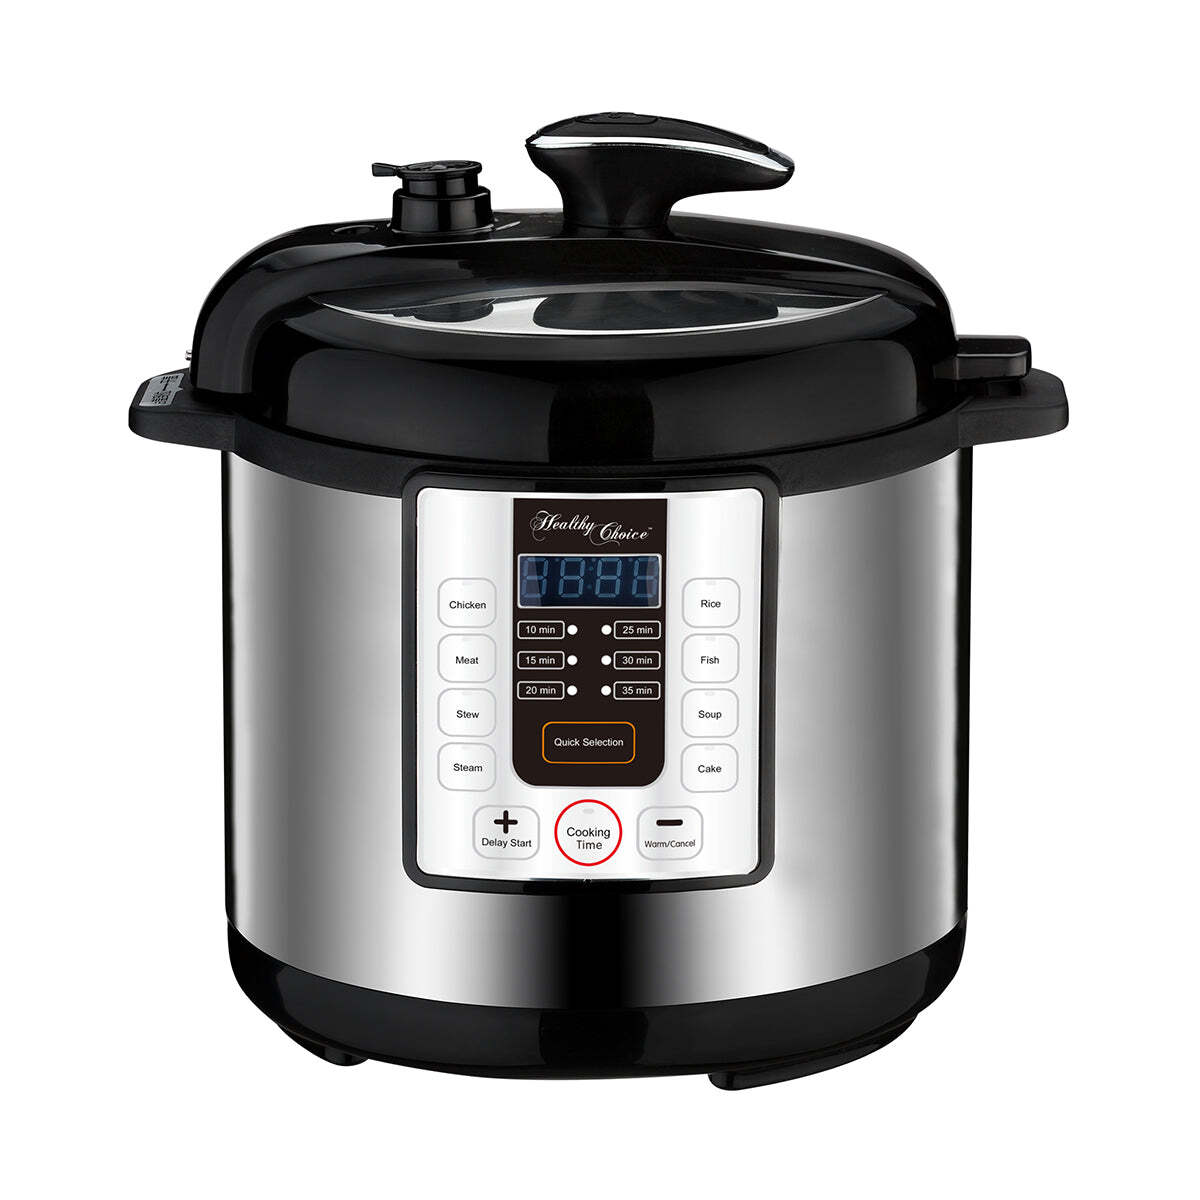 PRESSURE COOKER AND SLOW COOKER - 6 LITRE | Buy Pressure Cookers ...